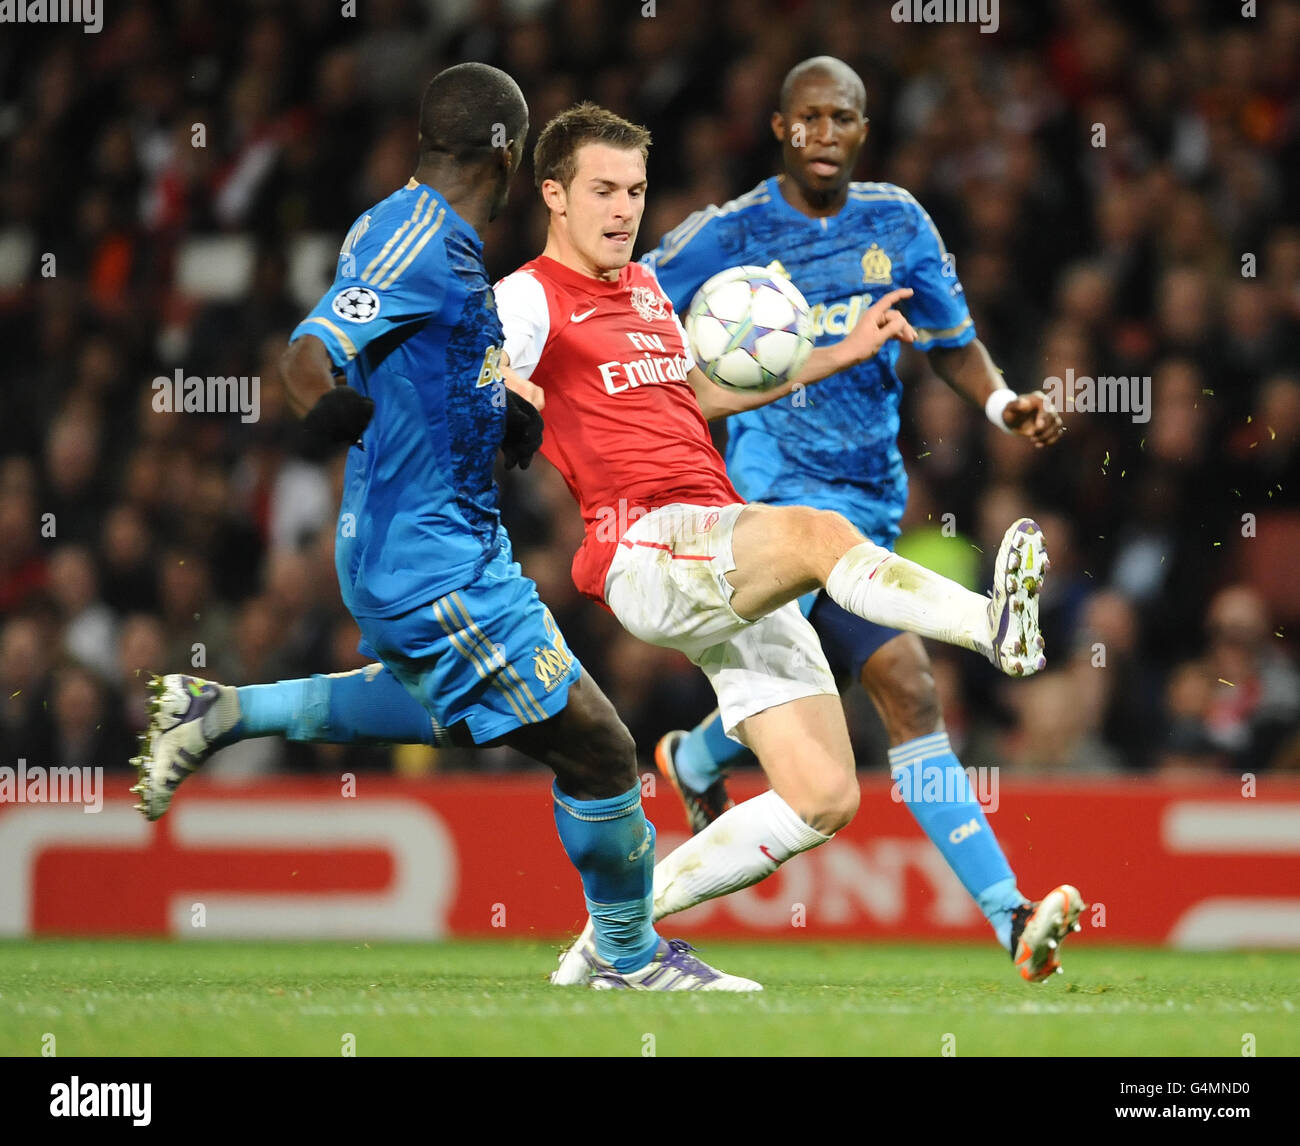 Arsenal's Aaron Ramsey (centre) is challenged by Olympique Marseille's Olympique Marseille's Souleymane Diawara (left) and Rod Fanni during a UEFA Champions League Group F match at the Emirates Stadium, London. Stock Photo